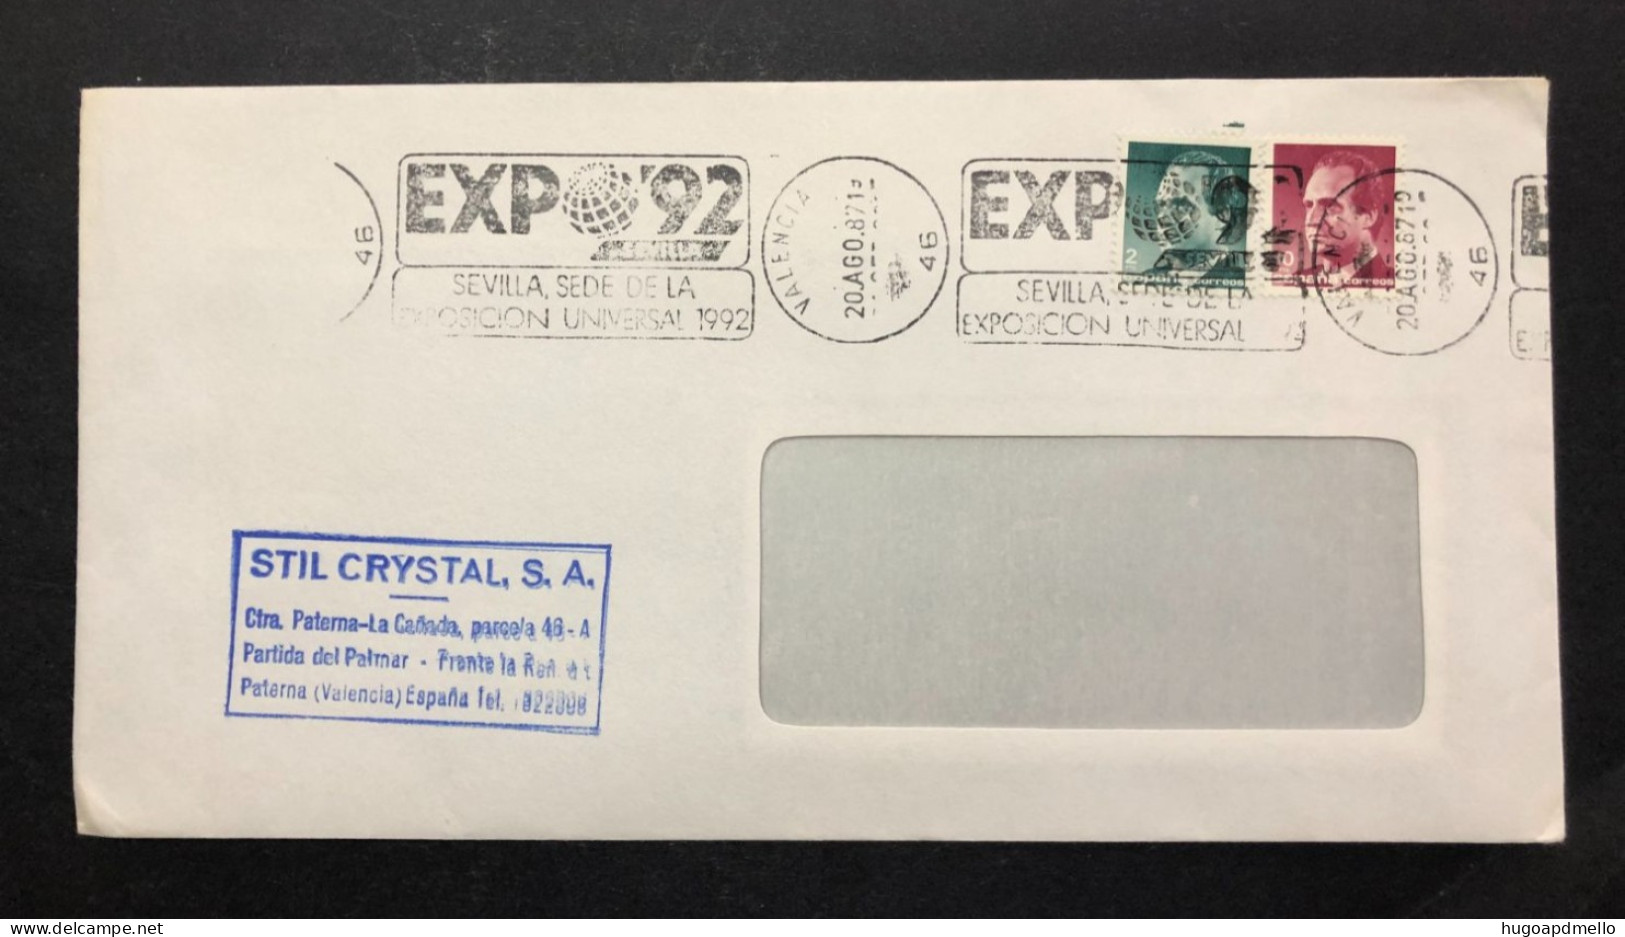 SPAIN, Cover With Special Cancellation « EXPO '92 », « VALENCIA Postmark », 1987 - 1992 – Séville (Espagne)